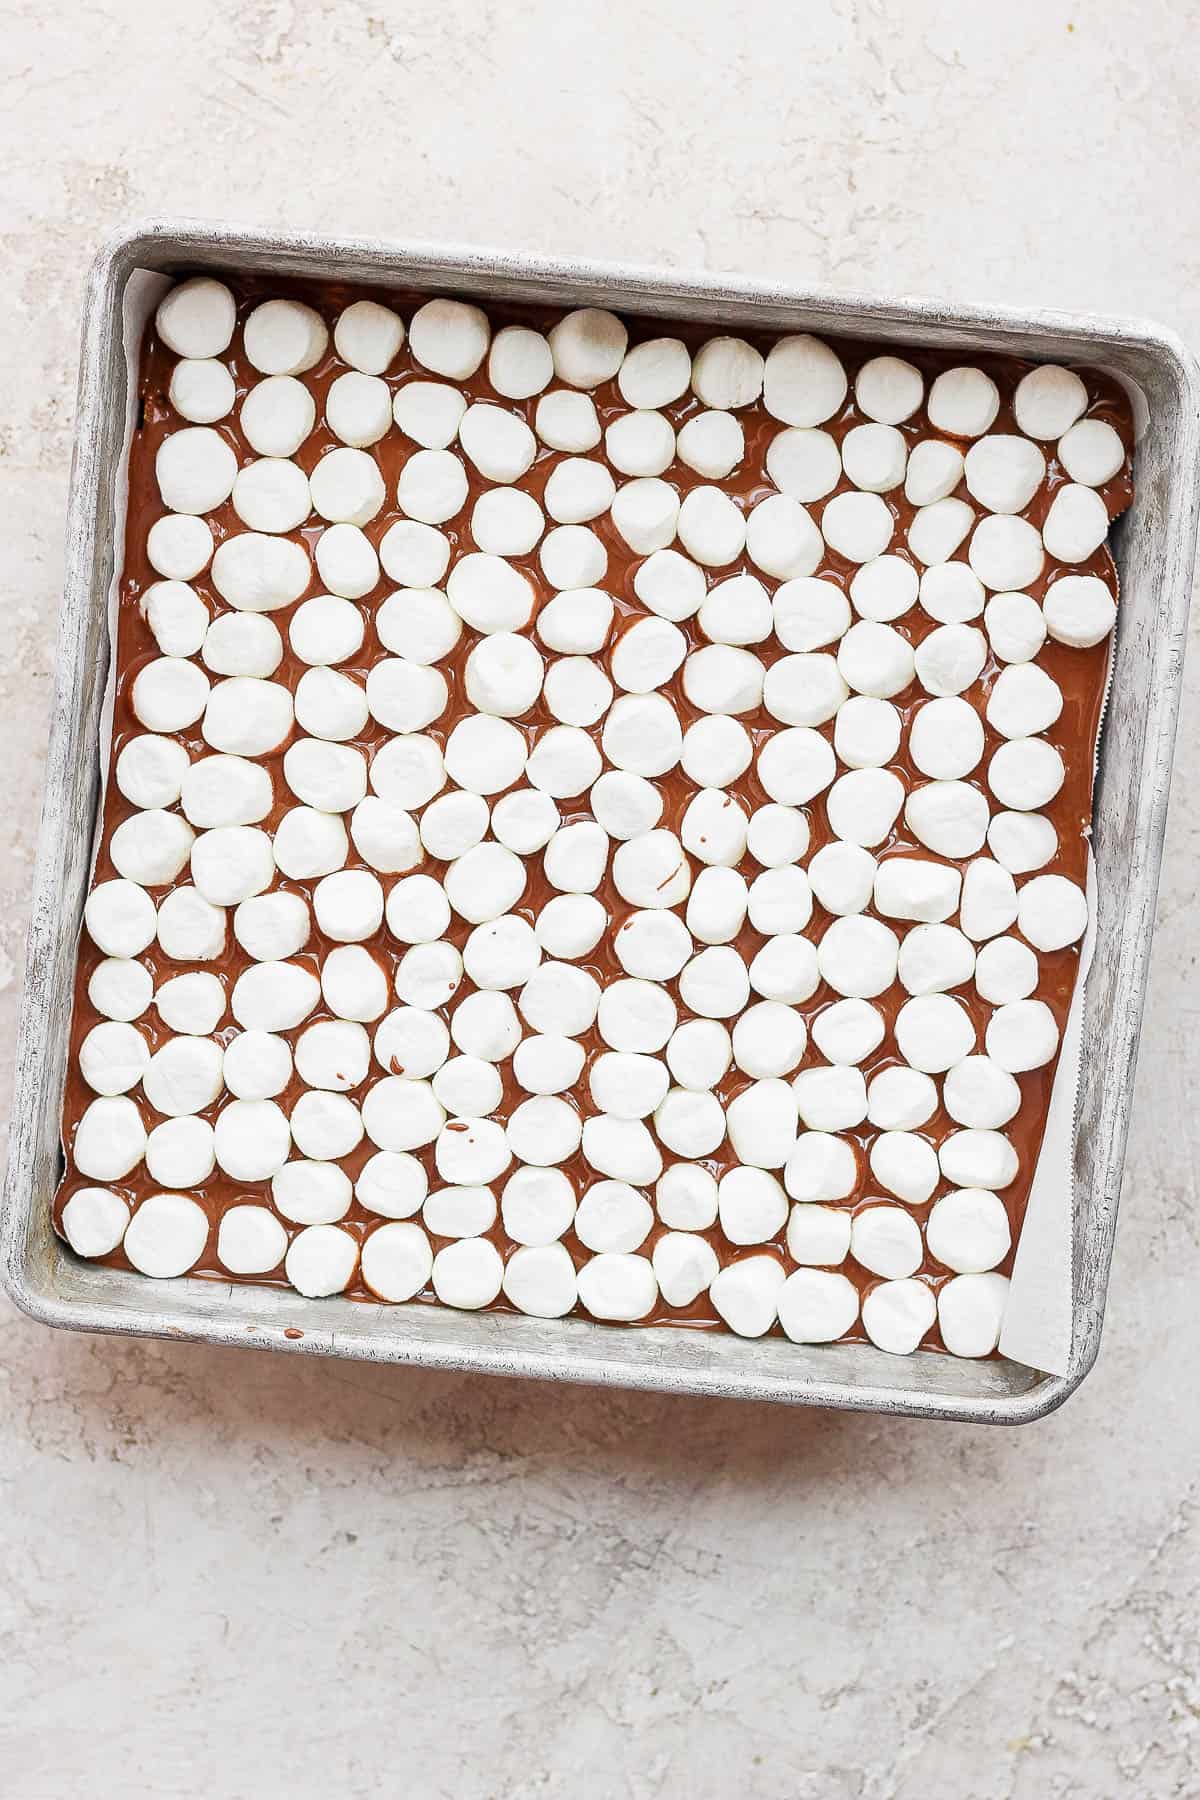 Mini marshmallows placed on top of the chocolate.